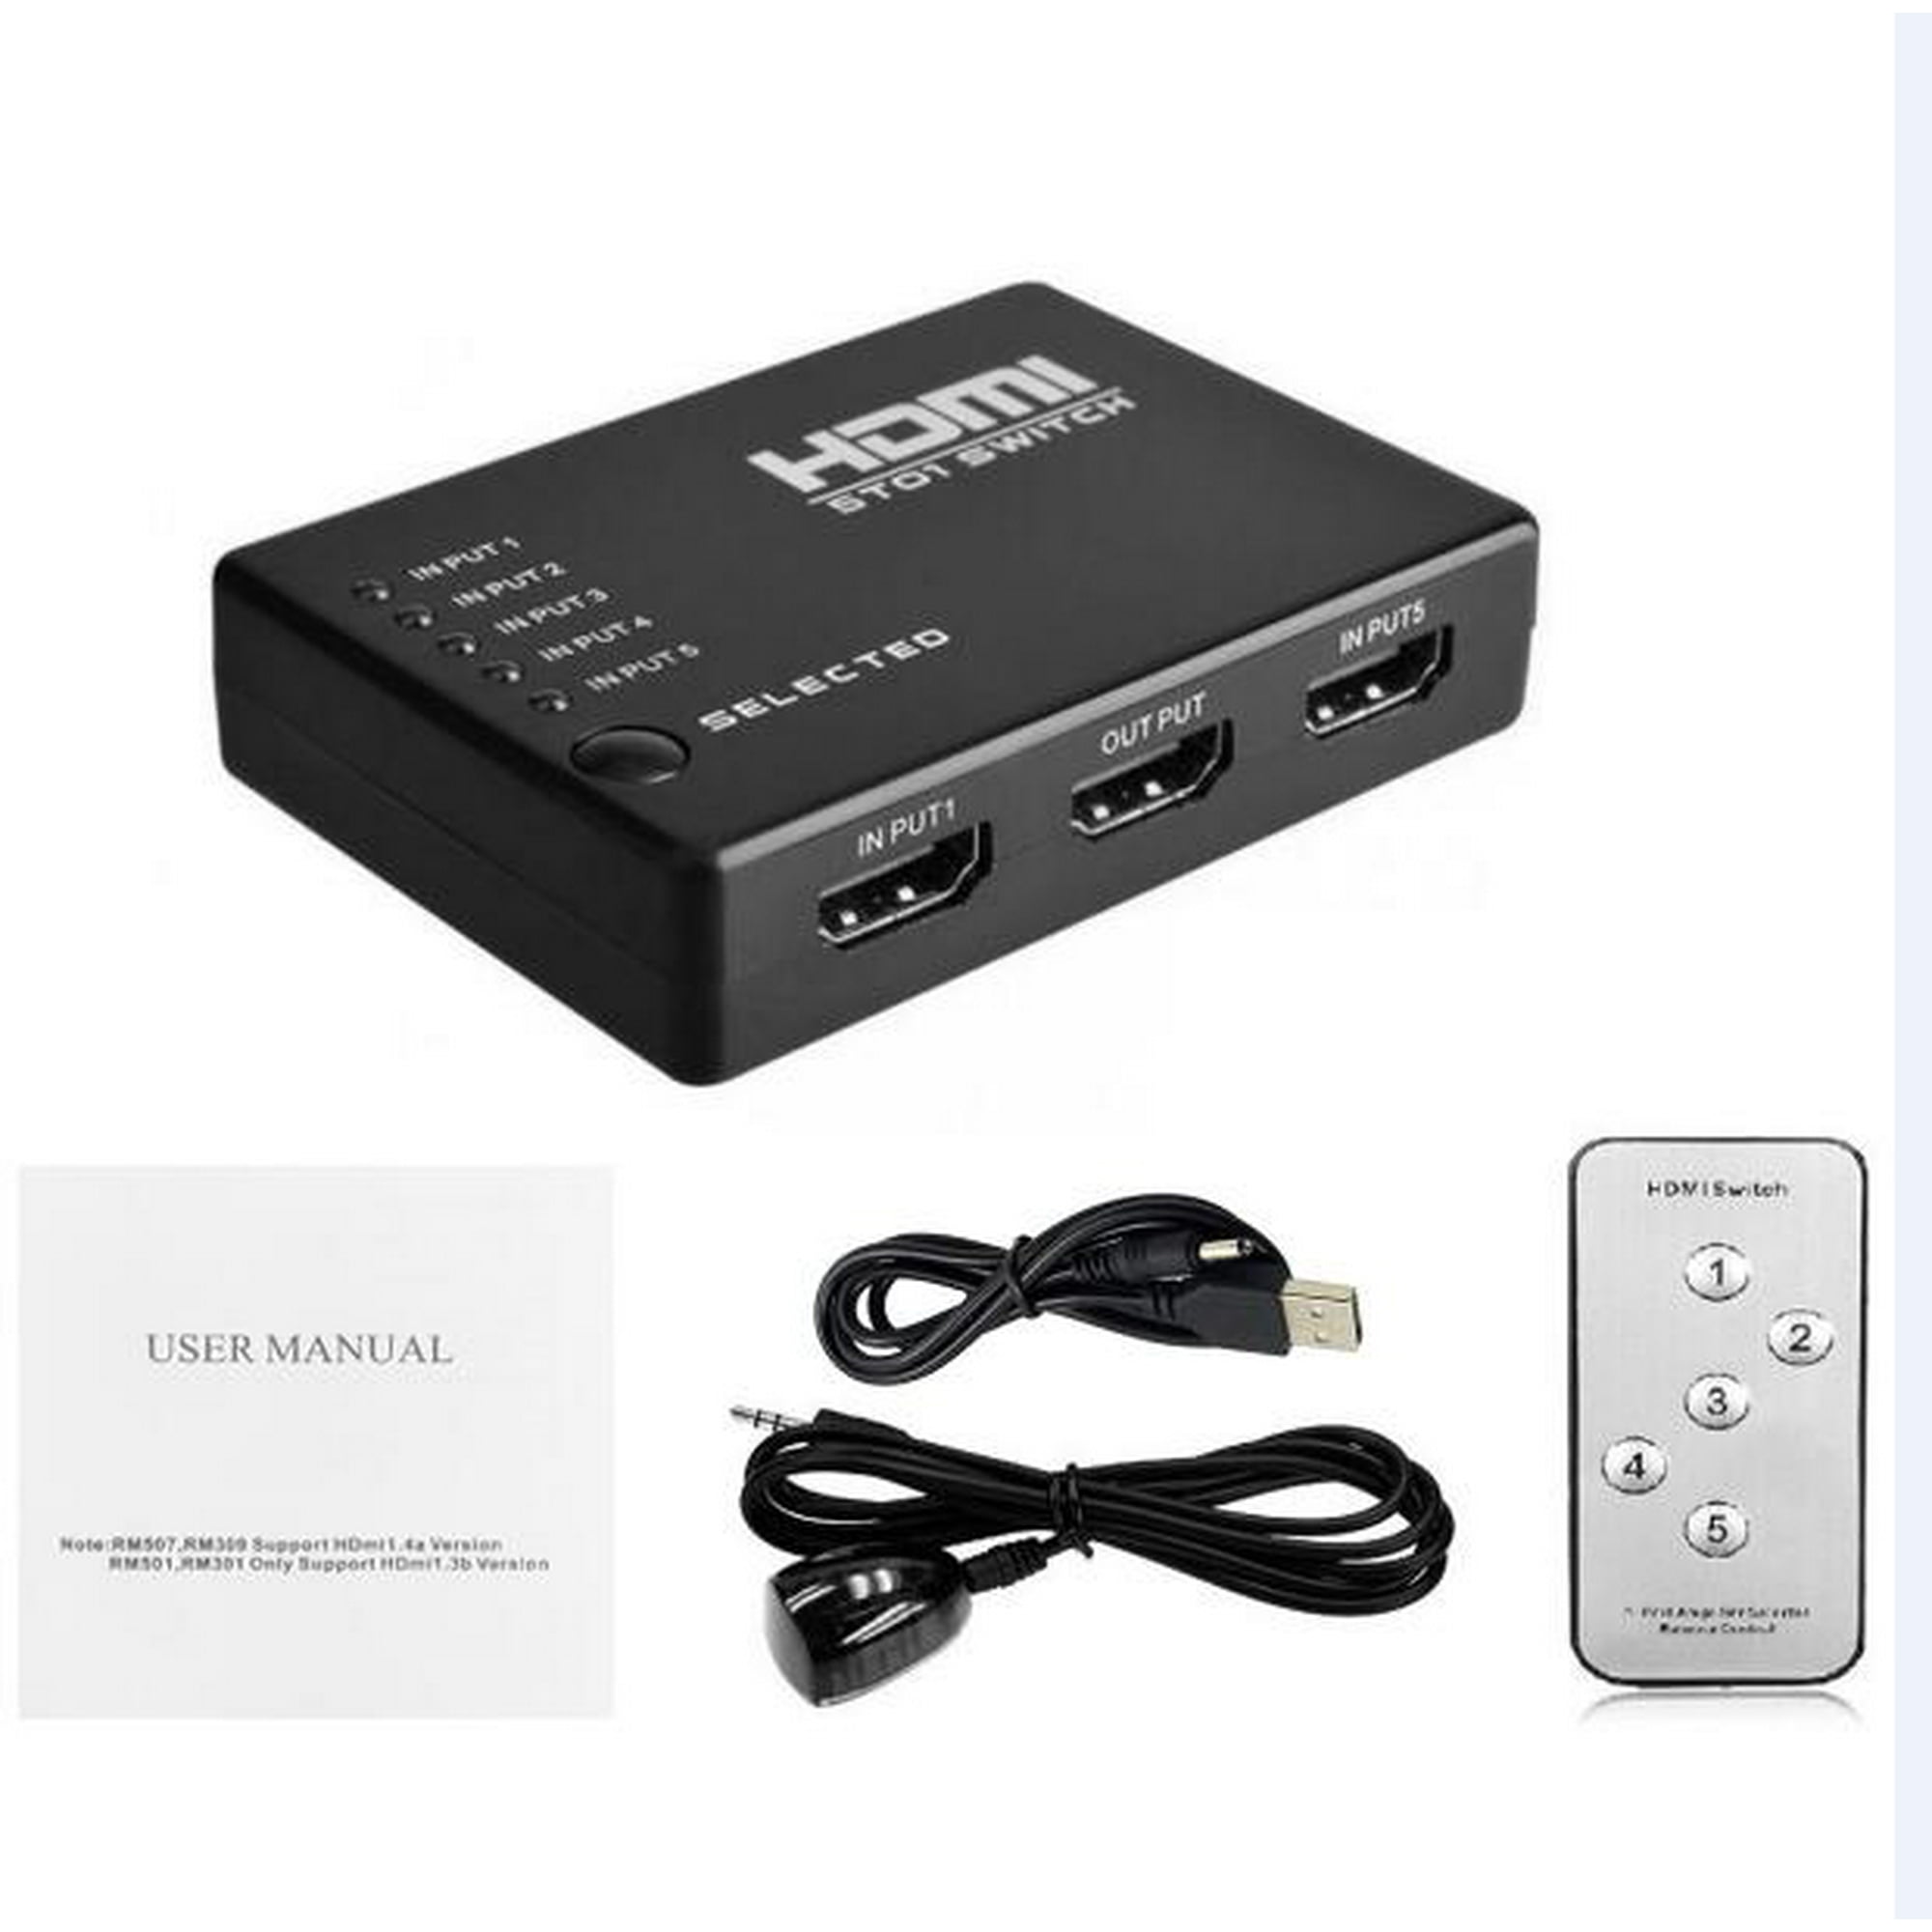 SLY Switcher - 5 PORT HDMI Splitter Selector Switcher Hub+Remote 1080p For HDTV Xbox 360/One | Walmart Canada